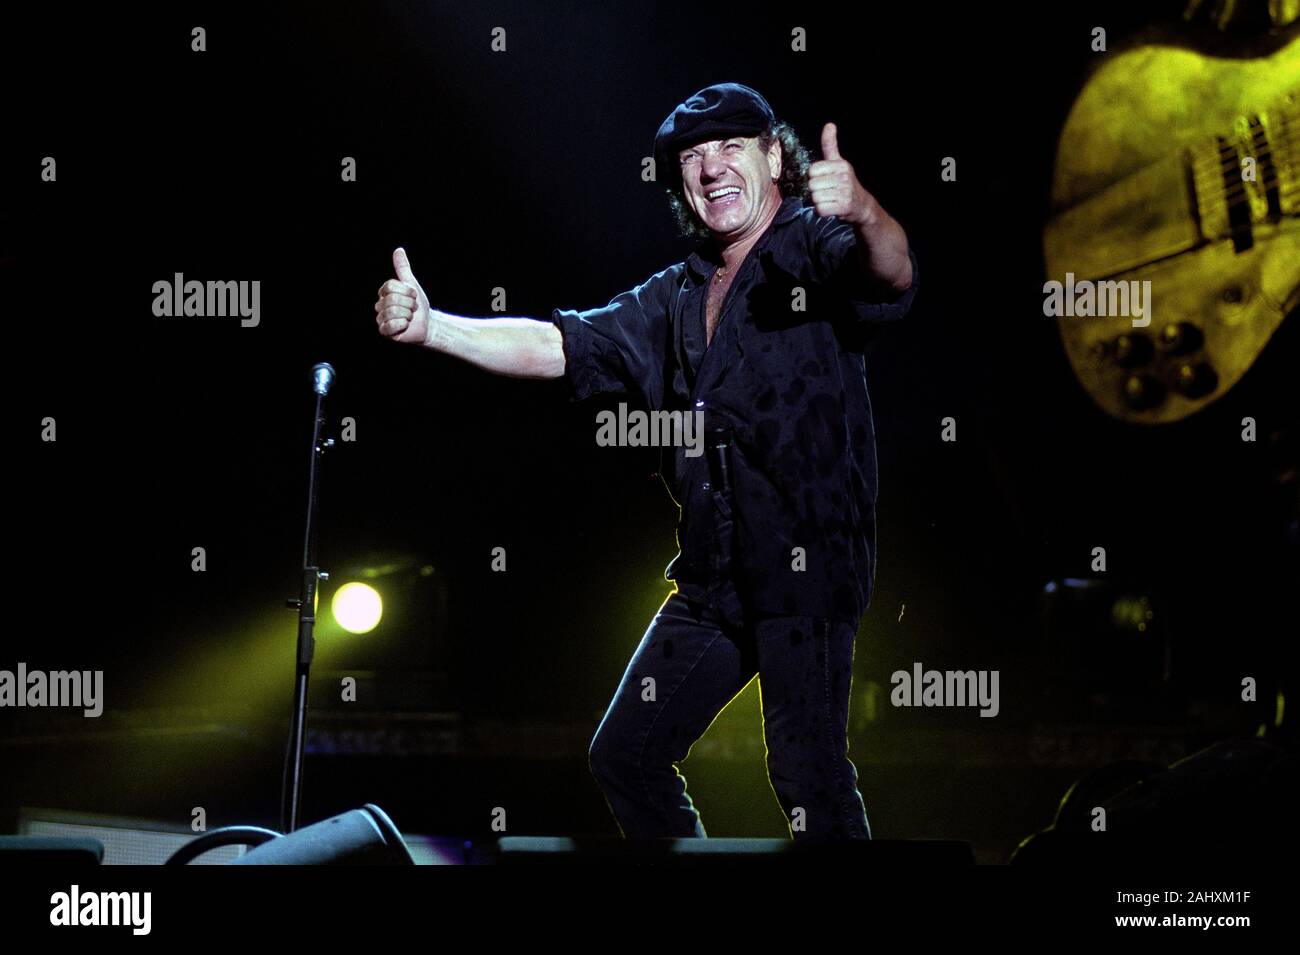 Turin, Italy, 04 July 2001,live concert of ACDC at the Delle Alpi Stadium of Turin : The Singer of the ACDC ,Brian Johnson, during the concert Stock Photo